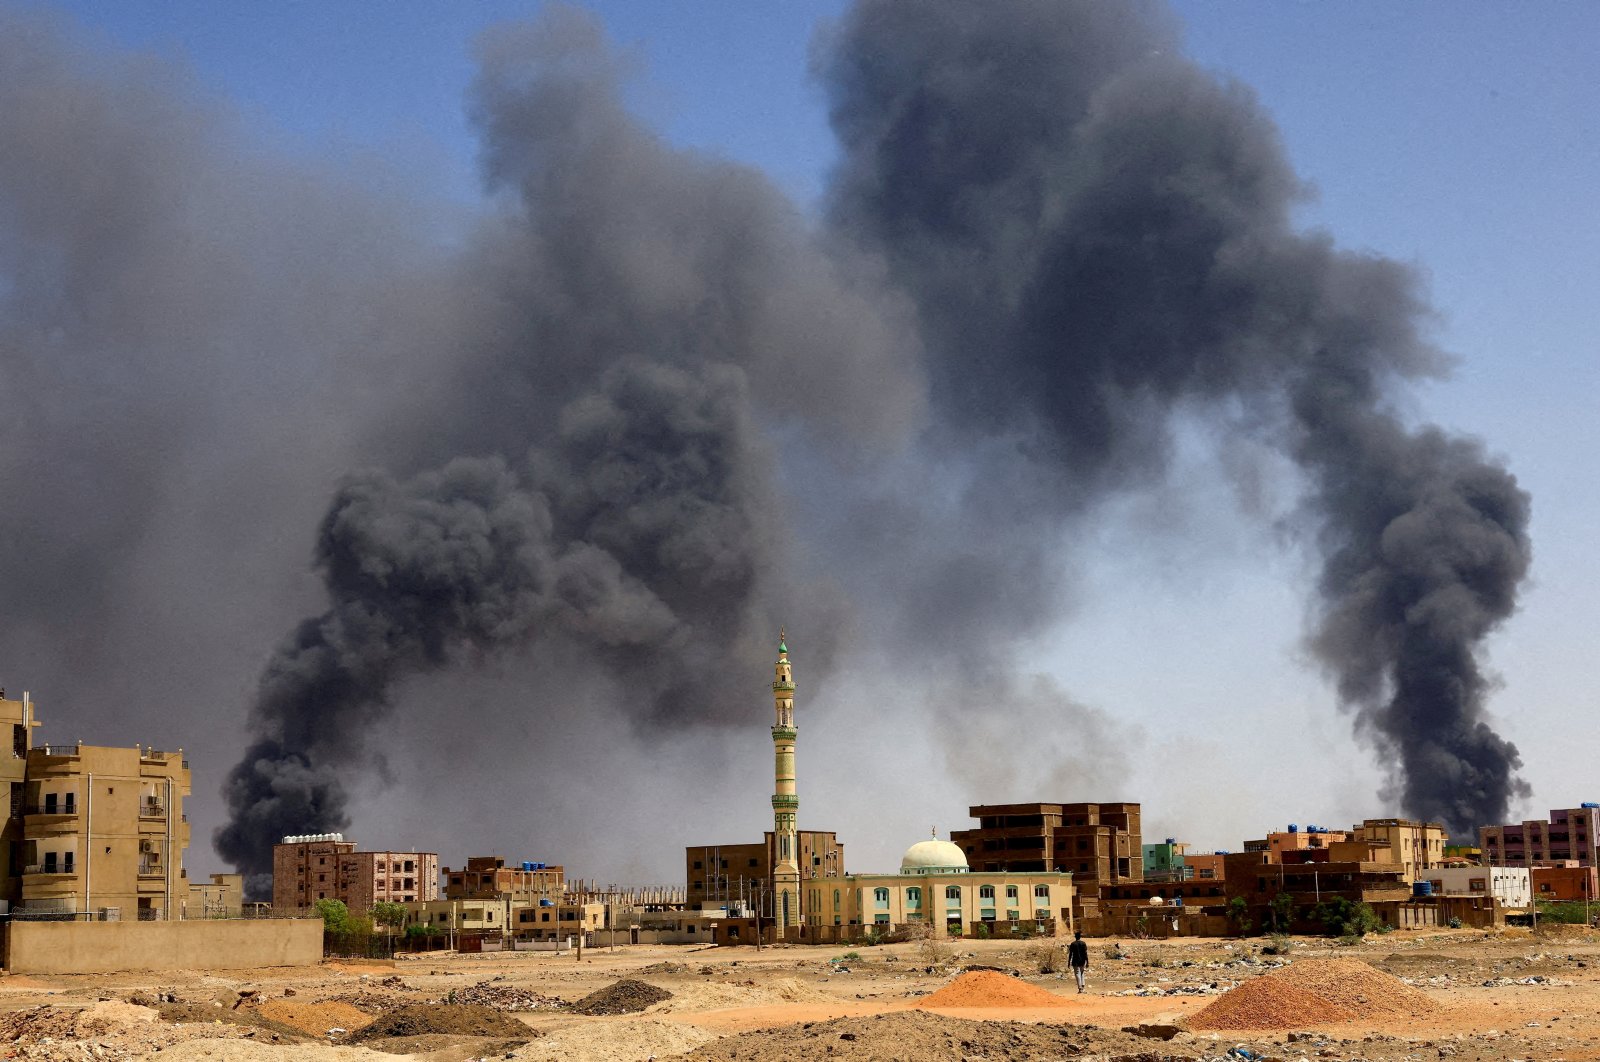 A man walks while smoke rises above buildings after aerial bombardment, during clashes between the paramilitary Rapid Support Forces and the army in Khartoum North, Sudan, May 1, 2023. (Reuters File Photo)